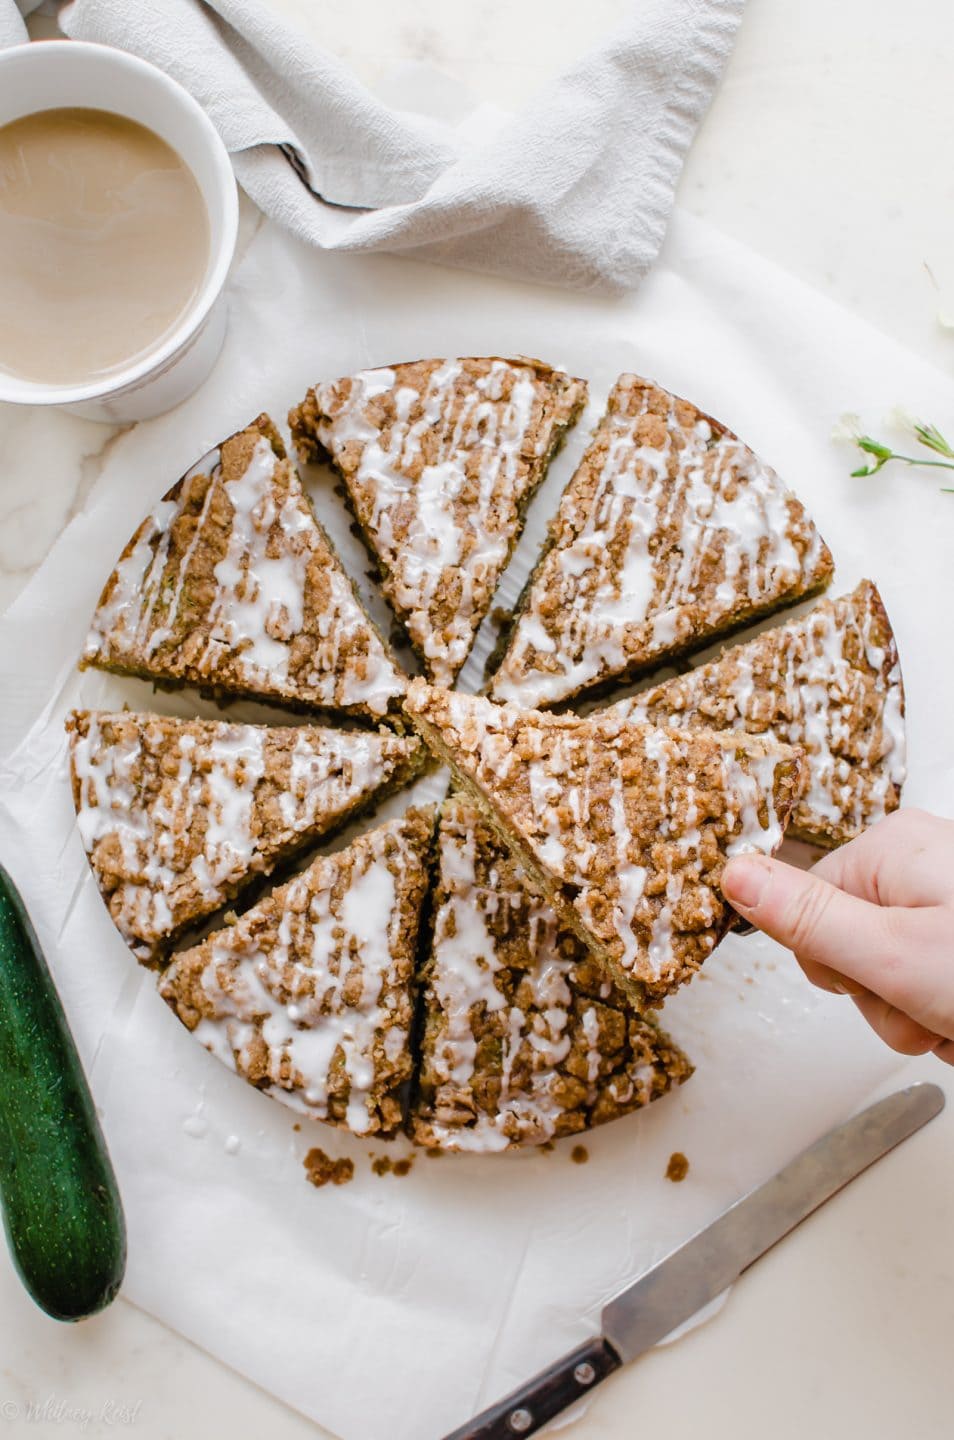 An overhead shot of a sliced zucchini coffee cake with a hand lifting a slice from the center.